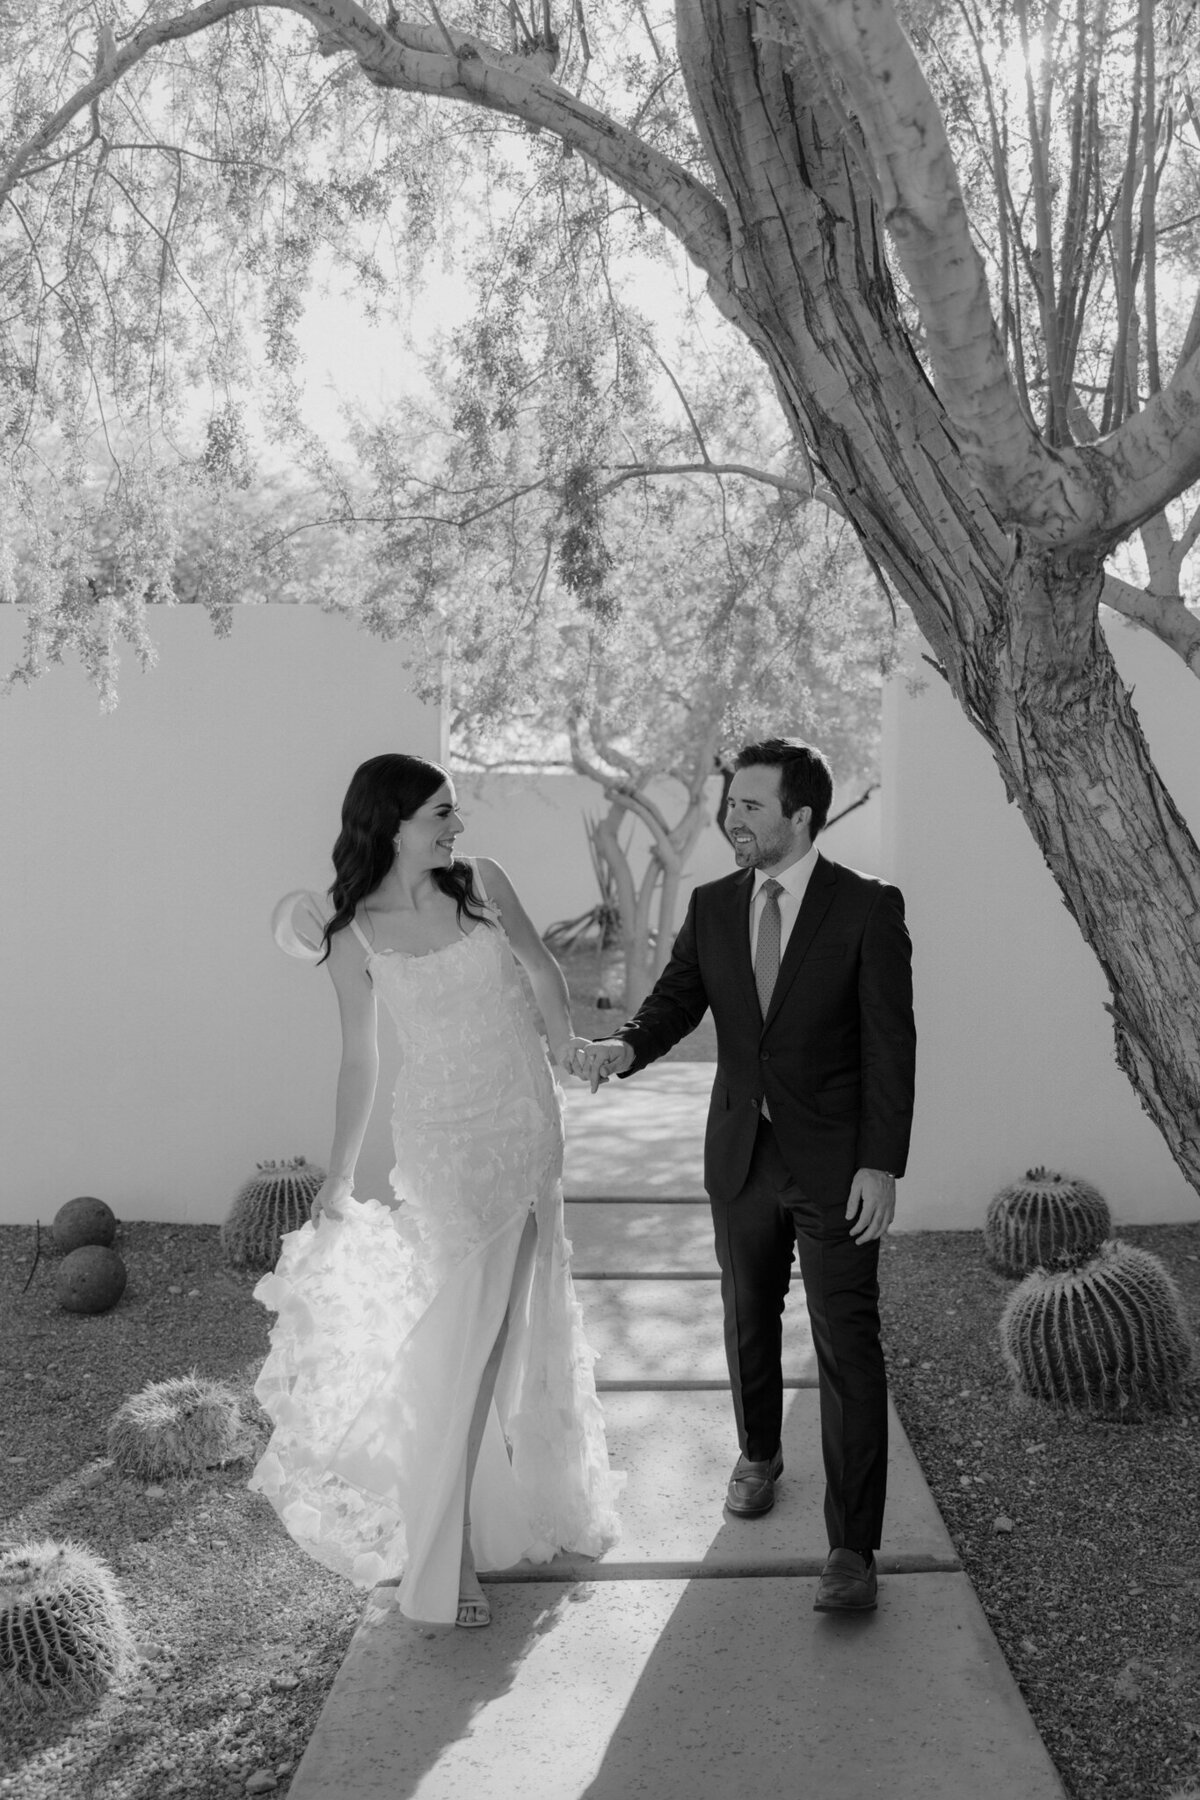 Bride wearing floral wedding dress and groom walking along paved path holding hands and smiling under a tree with cacti in the background.